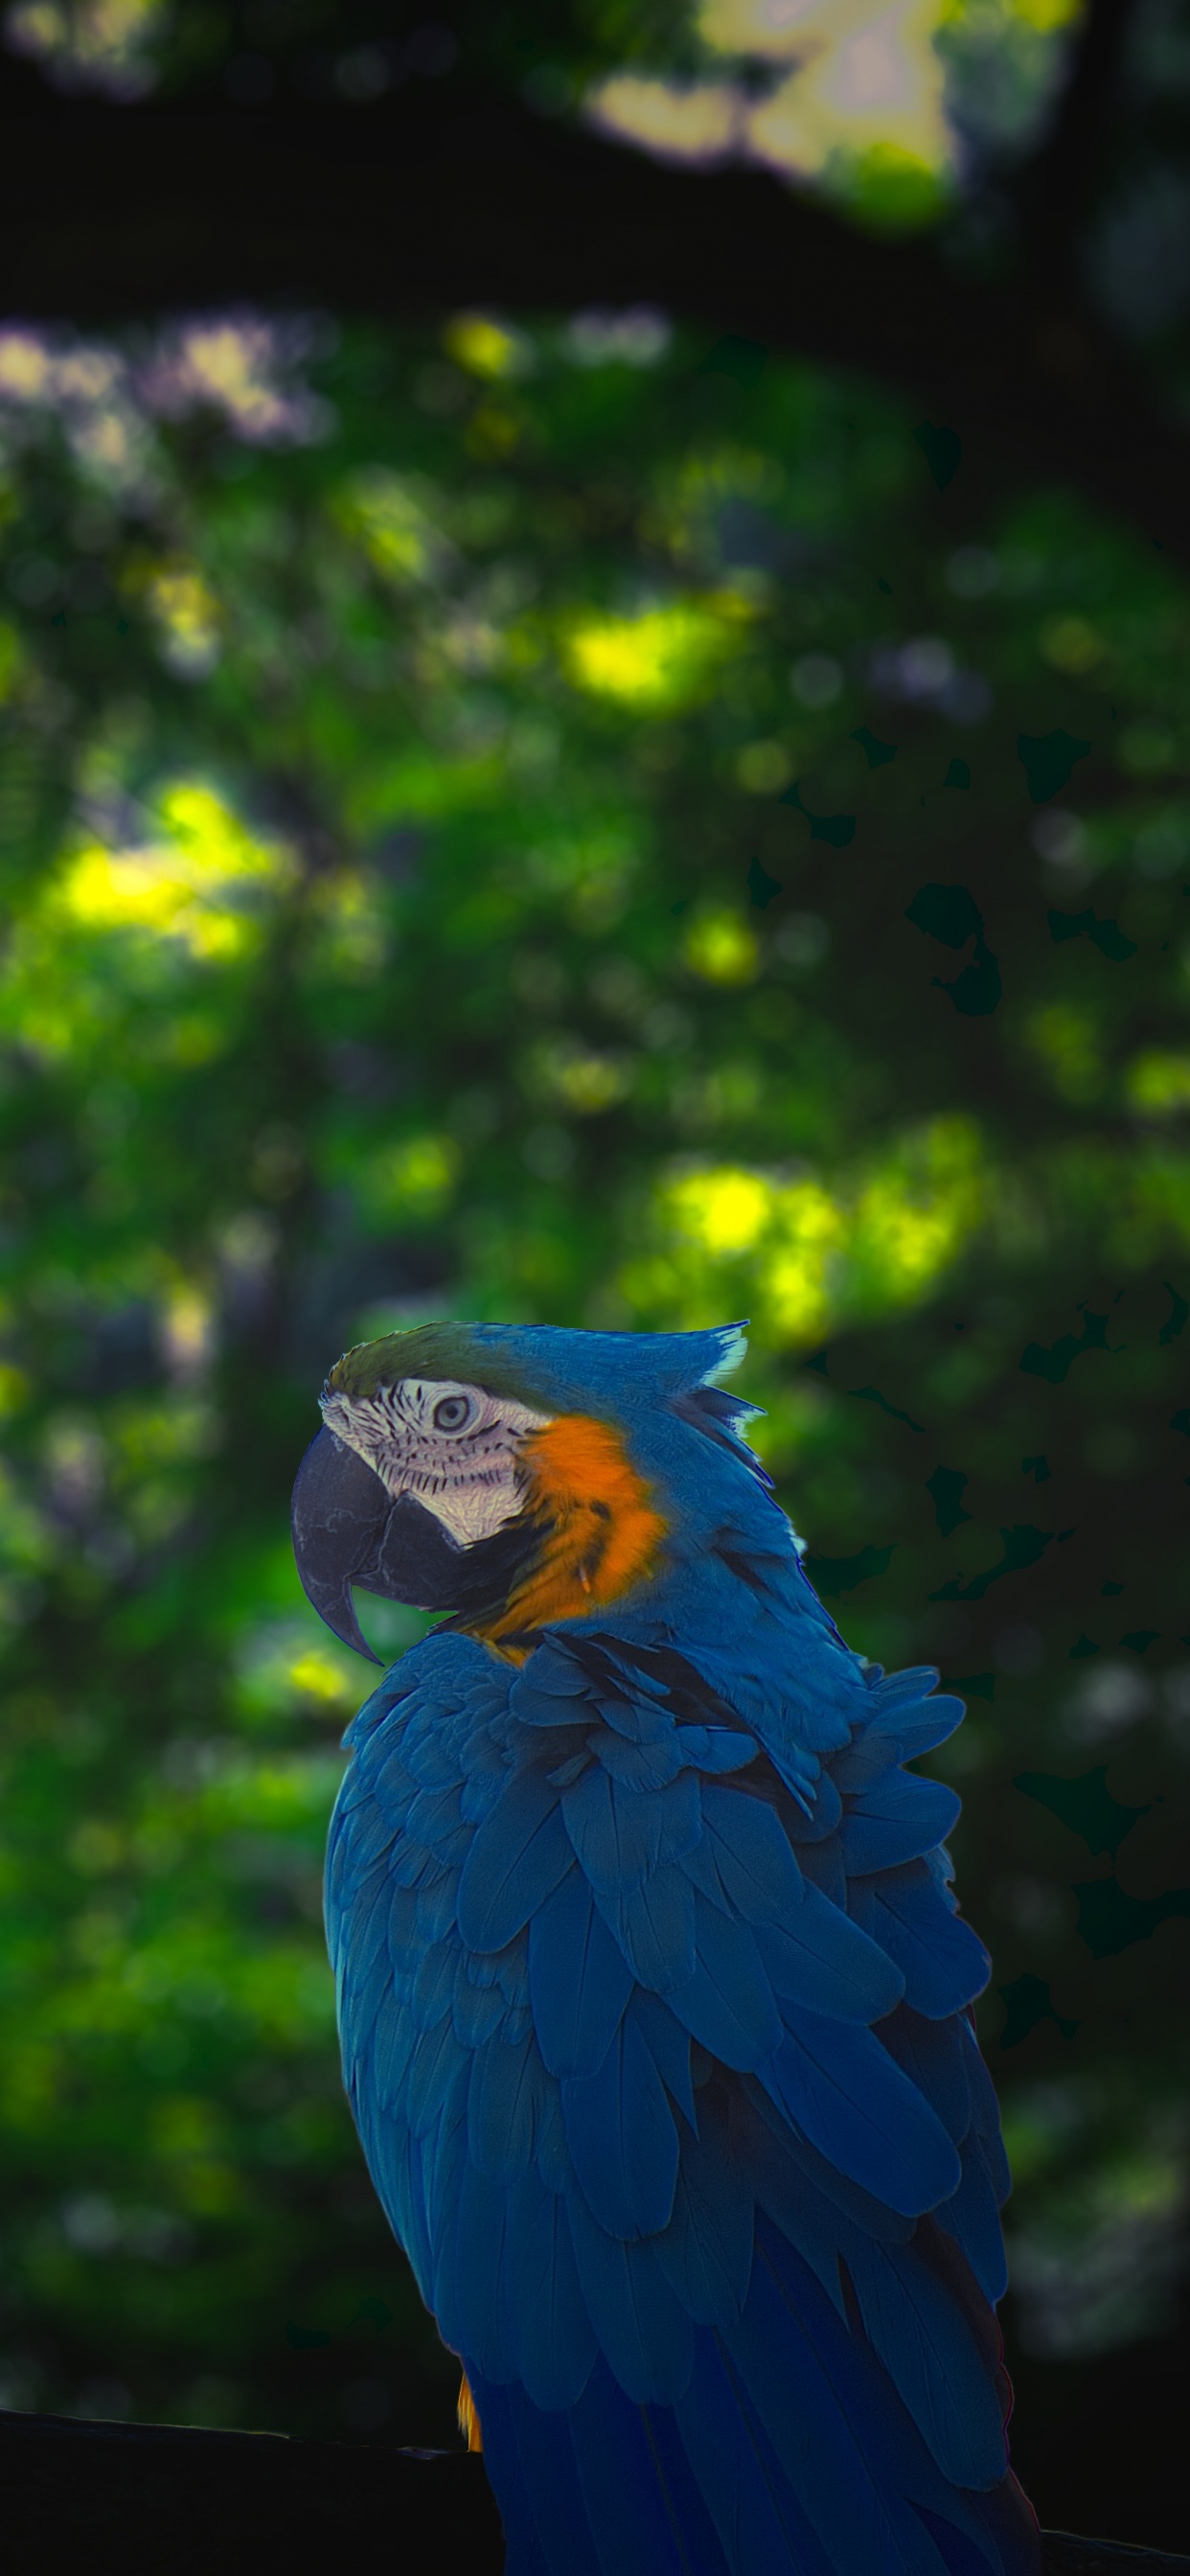 Blue and Yellow Macaw on Black Wooden Fence During Daytime. Wallpaper in 1242x2688 Resolution